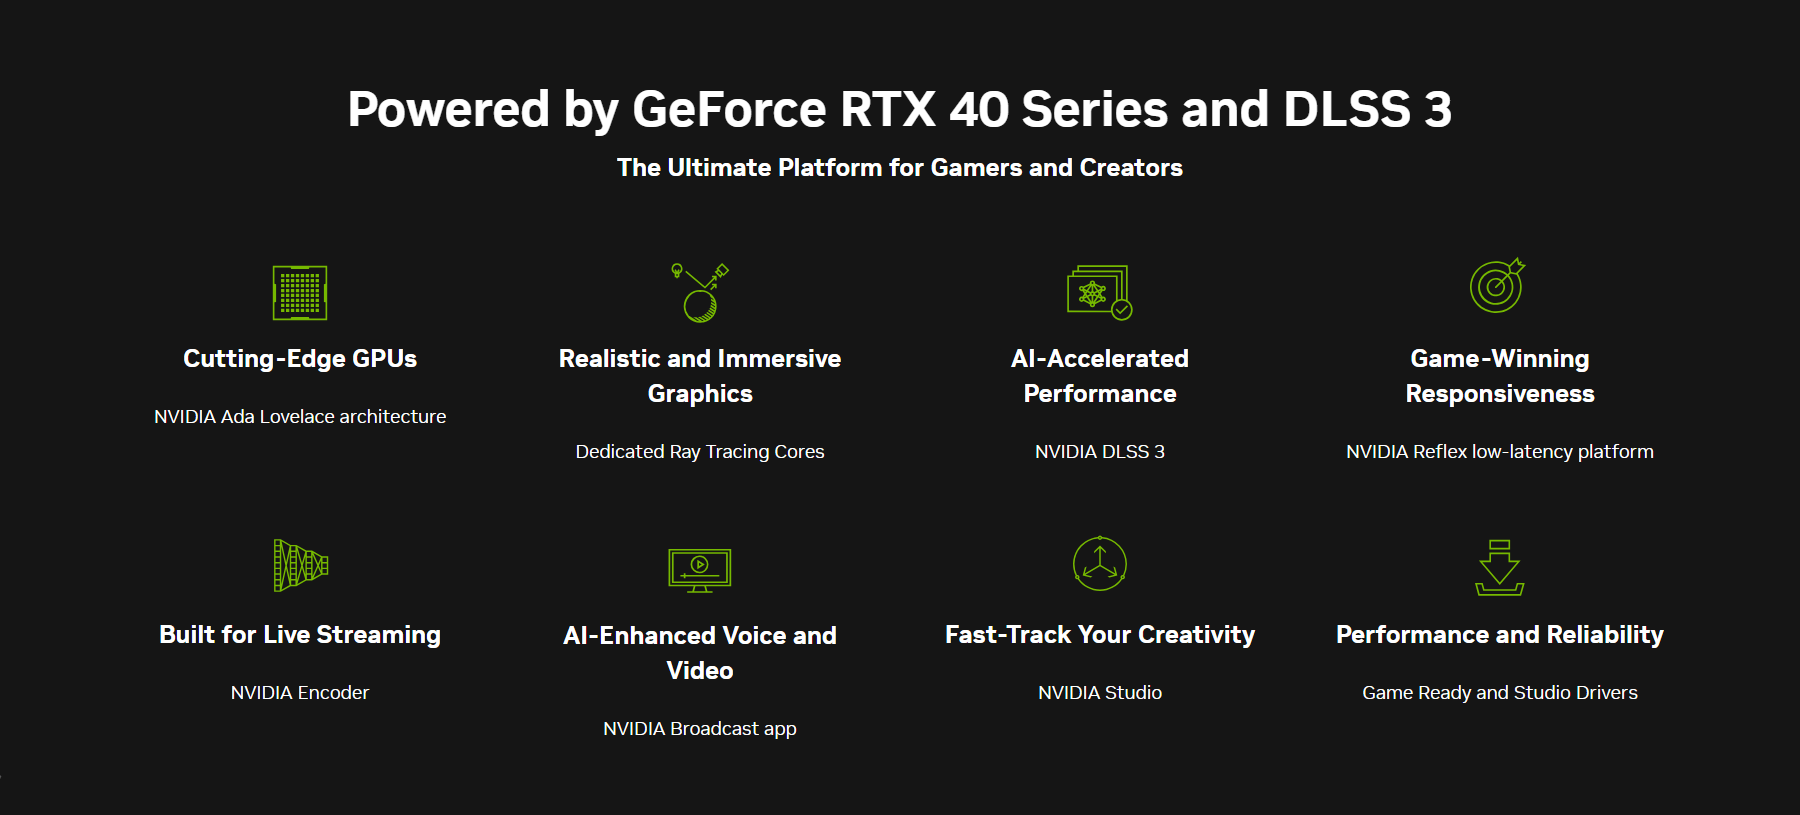 A large marketing image providing additional information about the product MSI GeForce RTX 4070 SUPER Gaming X Slim 12GB GDDR6X - Black - Additional alt info not provided